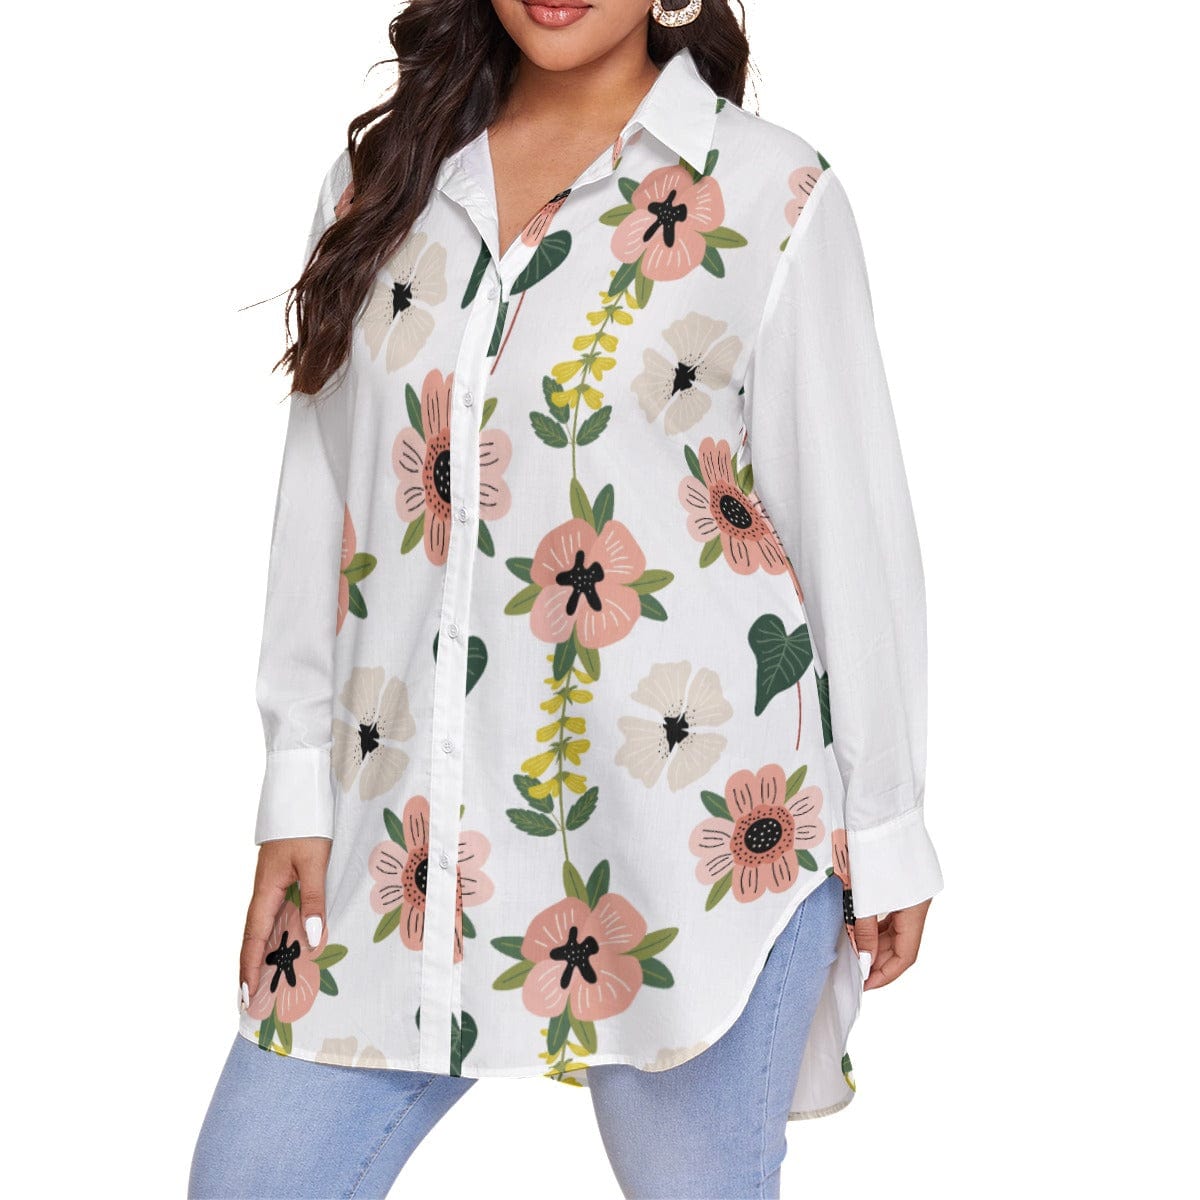 Yoycol Coral Floral - Women's Shirt With Long Sleeve(Plus Size)